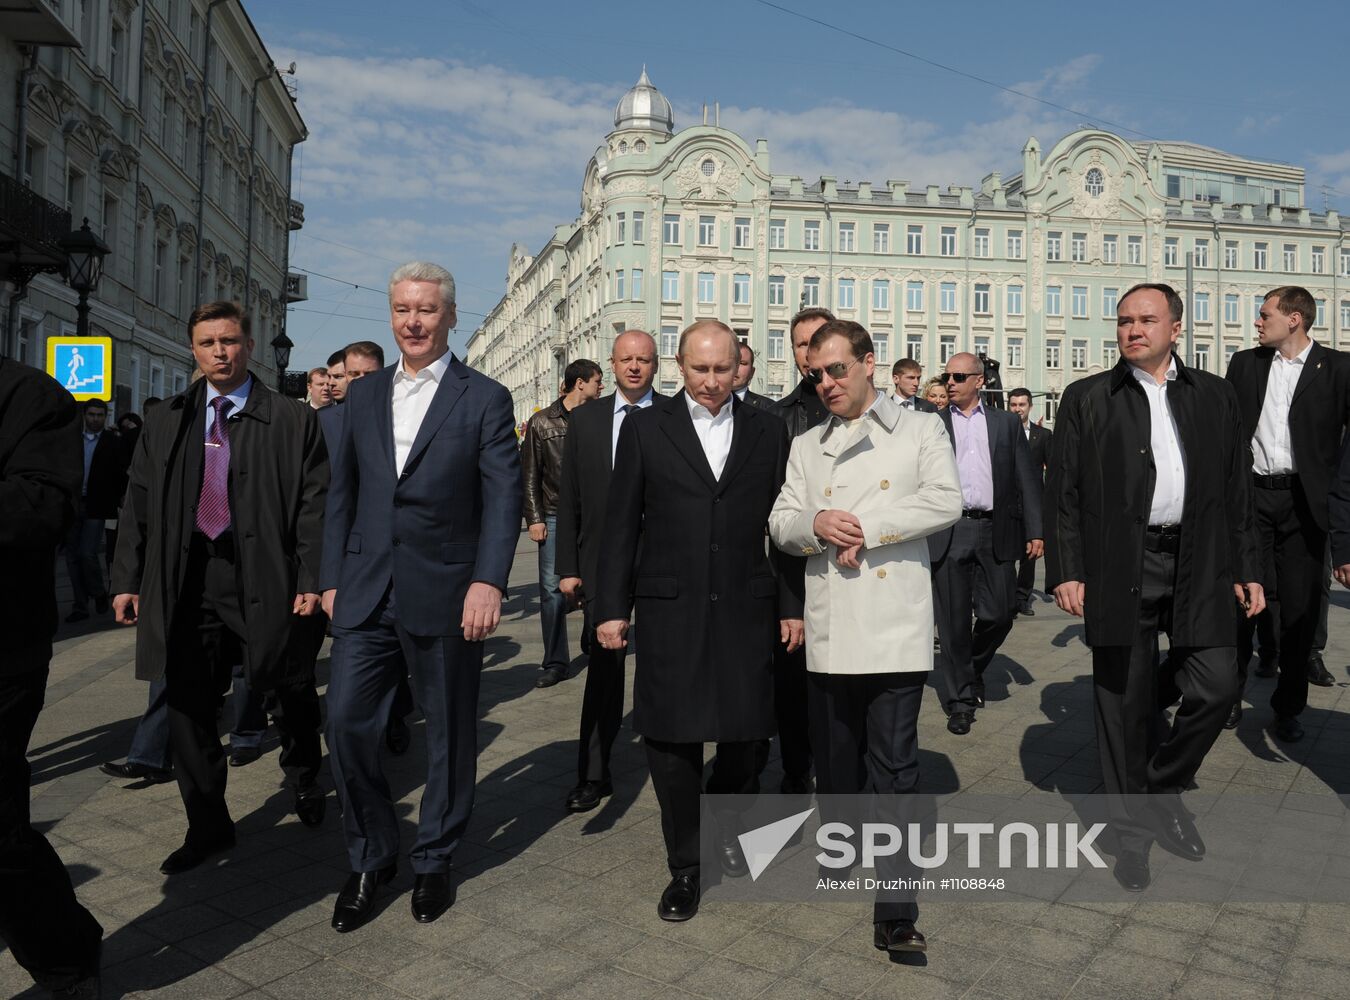 Medvedev, Putin join May day march